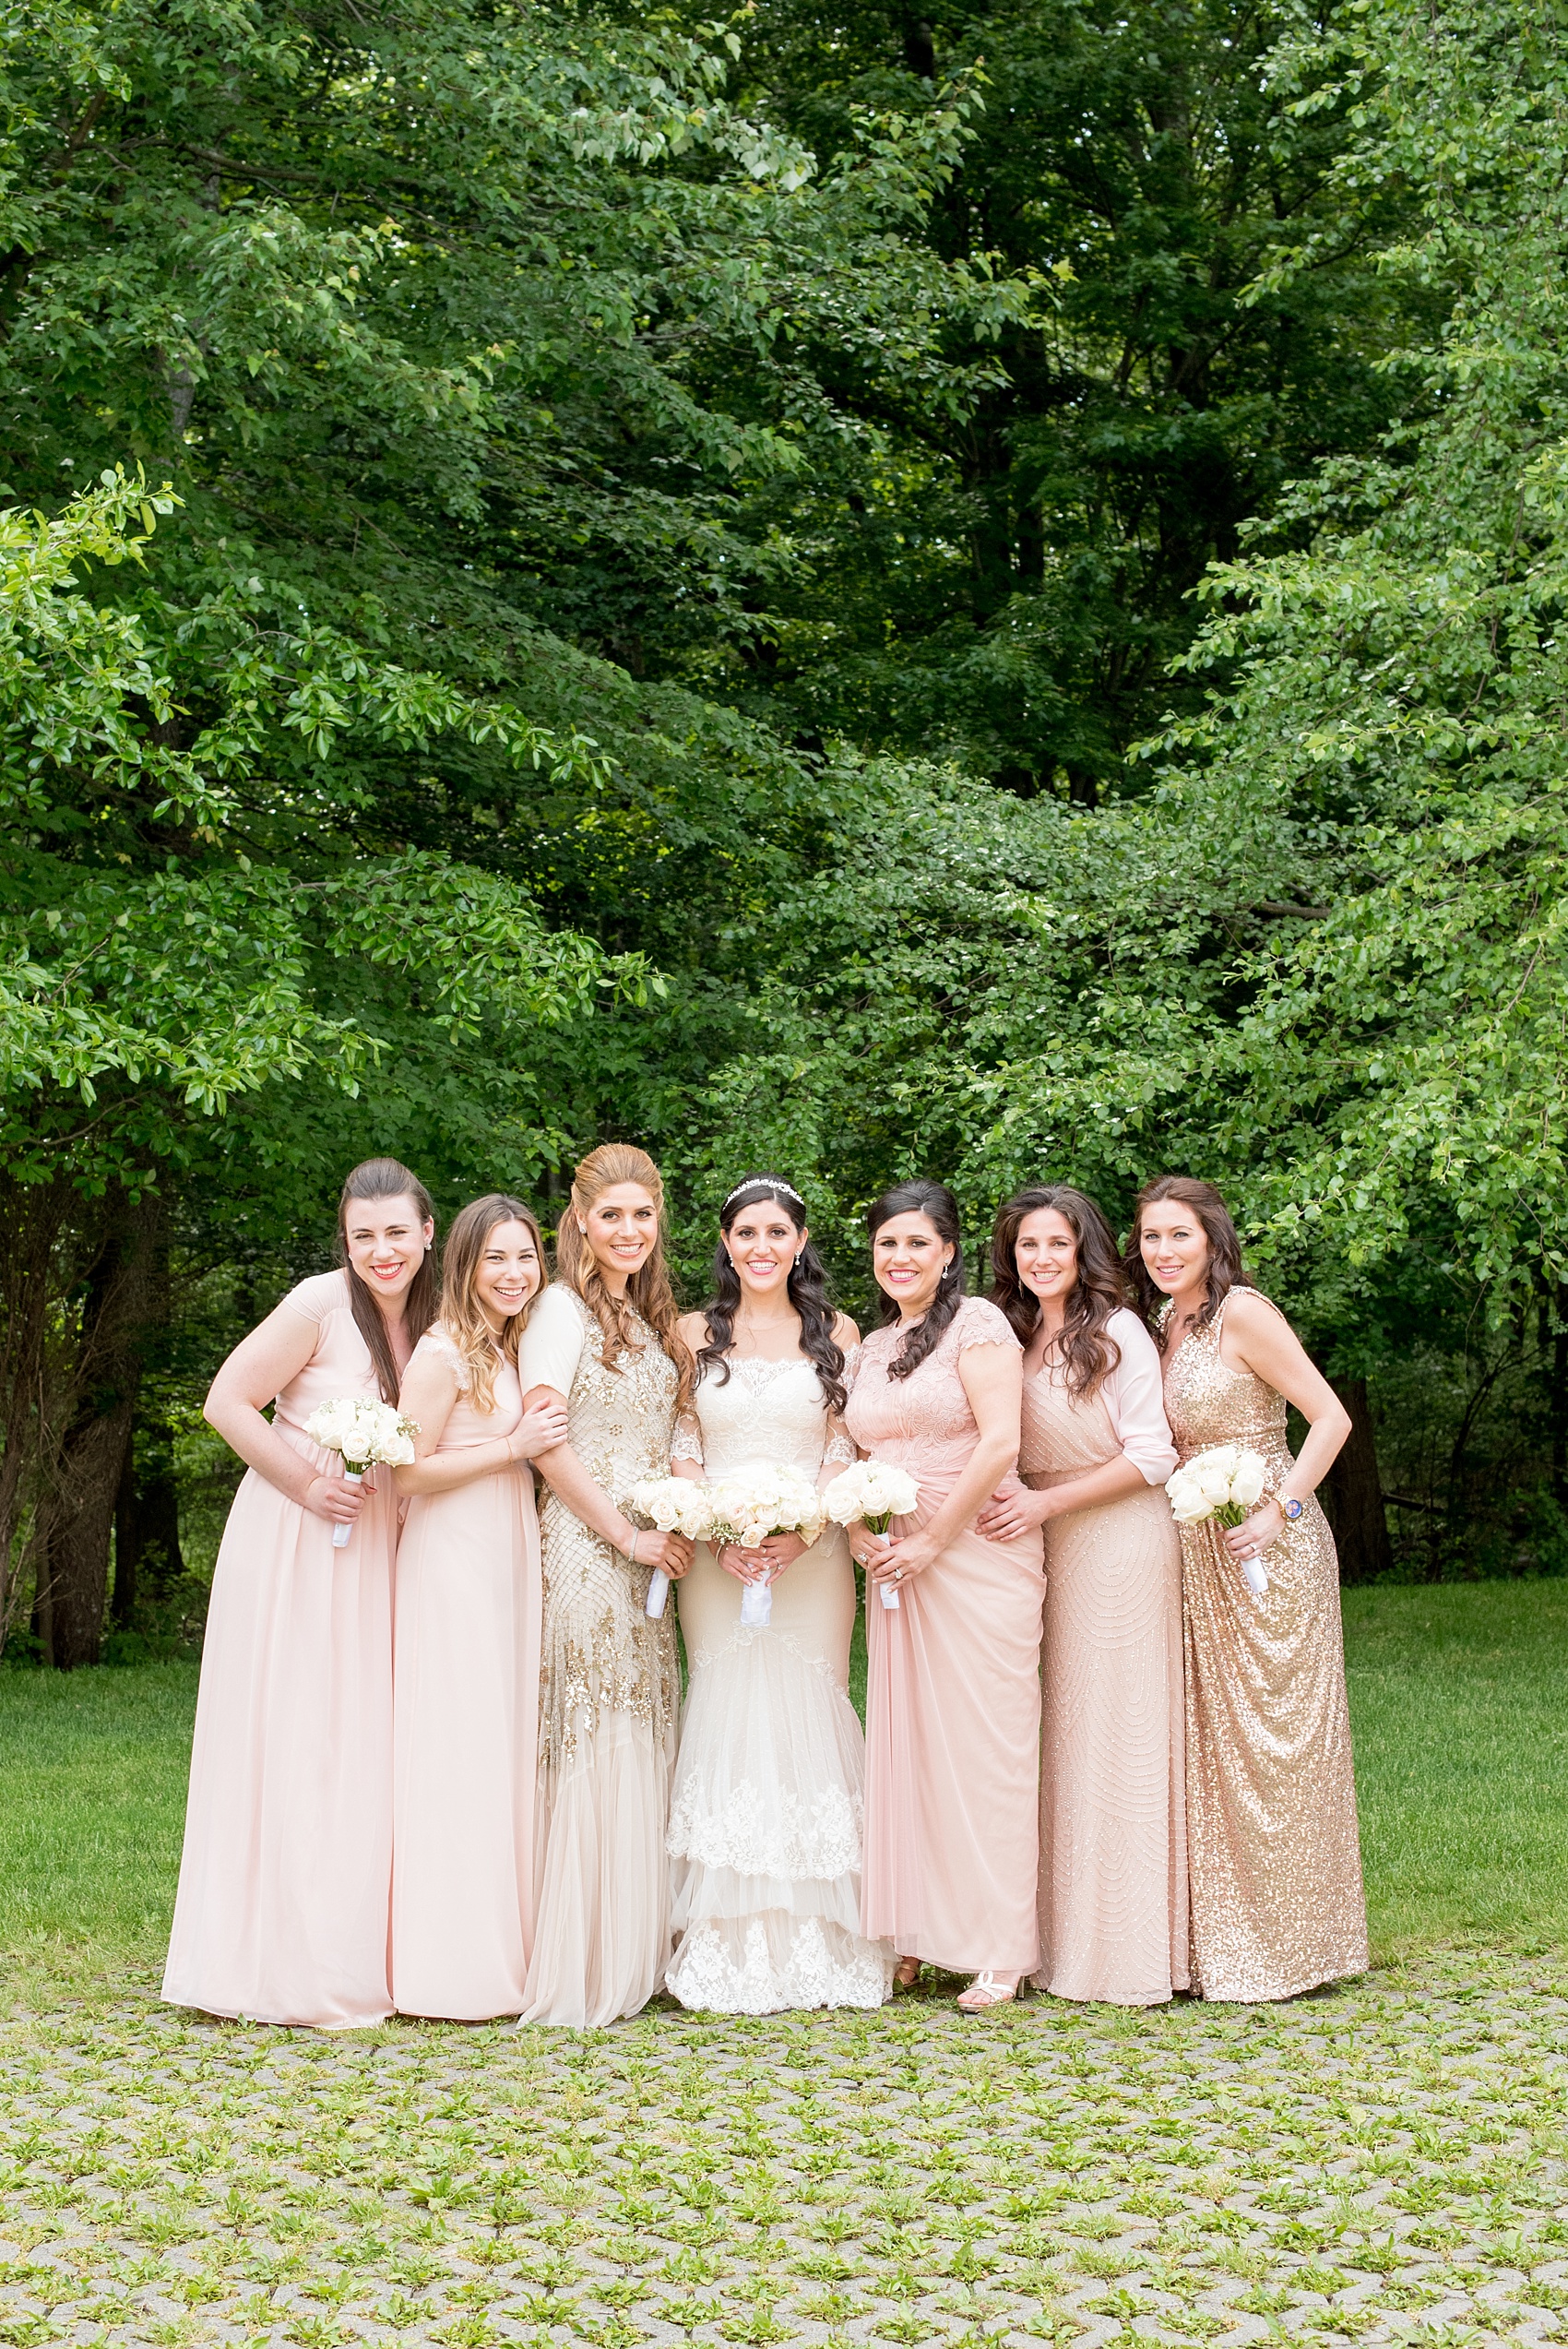 Mikkel Paige Photography photo of the bridesmaids in light pink blush mismatched dresses of their choice. Orthodox Jewish wedding at Temple Emanu-El in Closter, NJ.